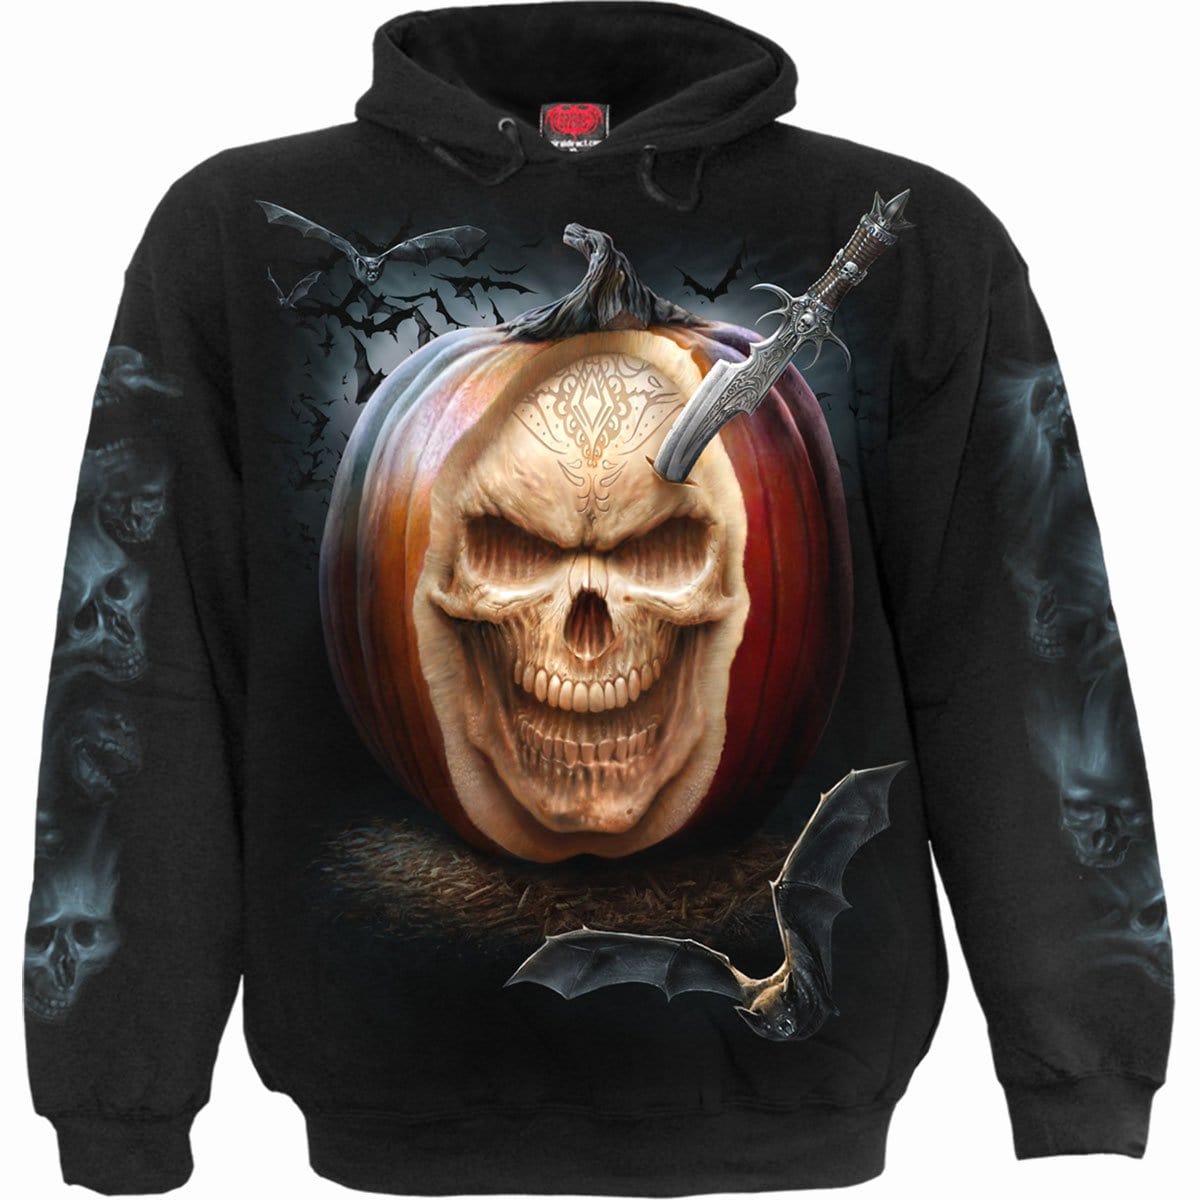 CARVING DEATH - Hoody Black - Spiral USA